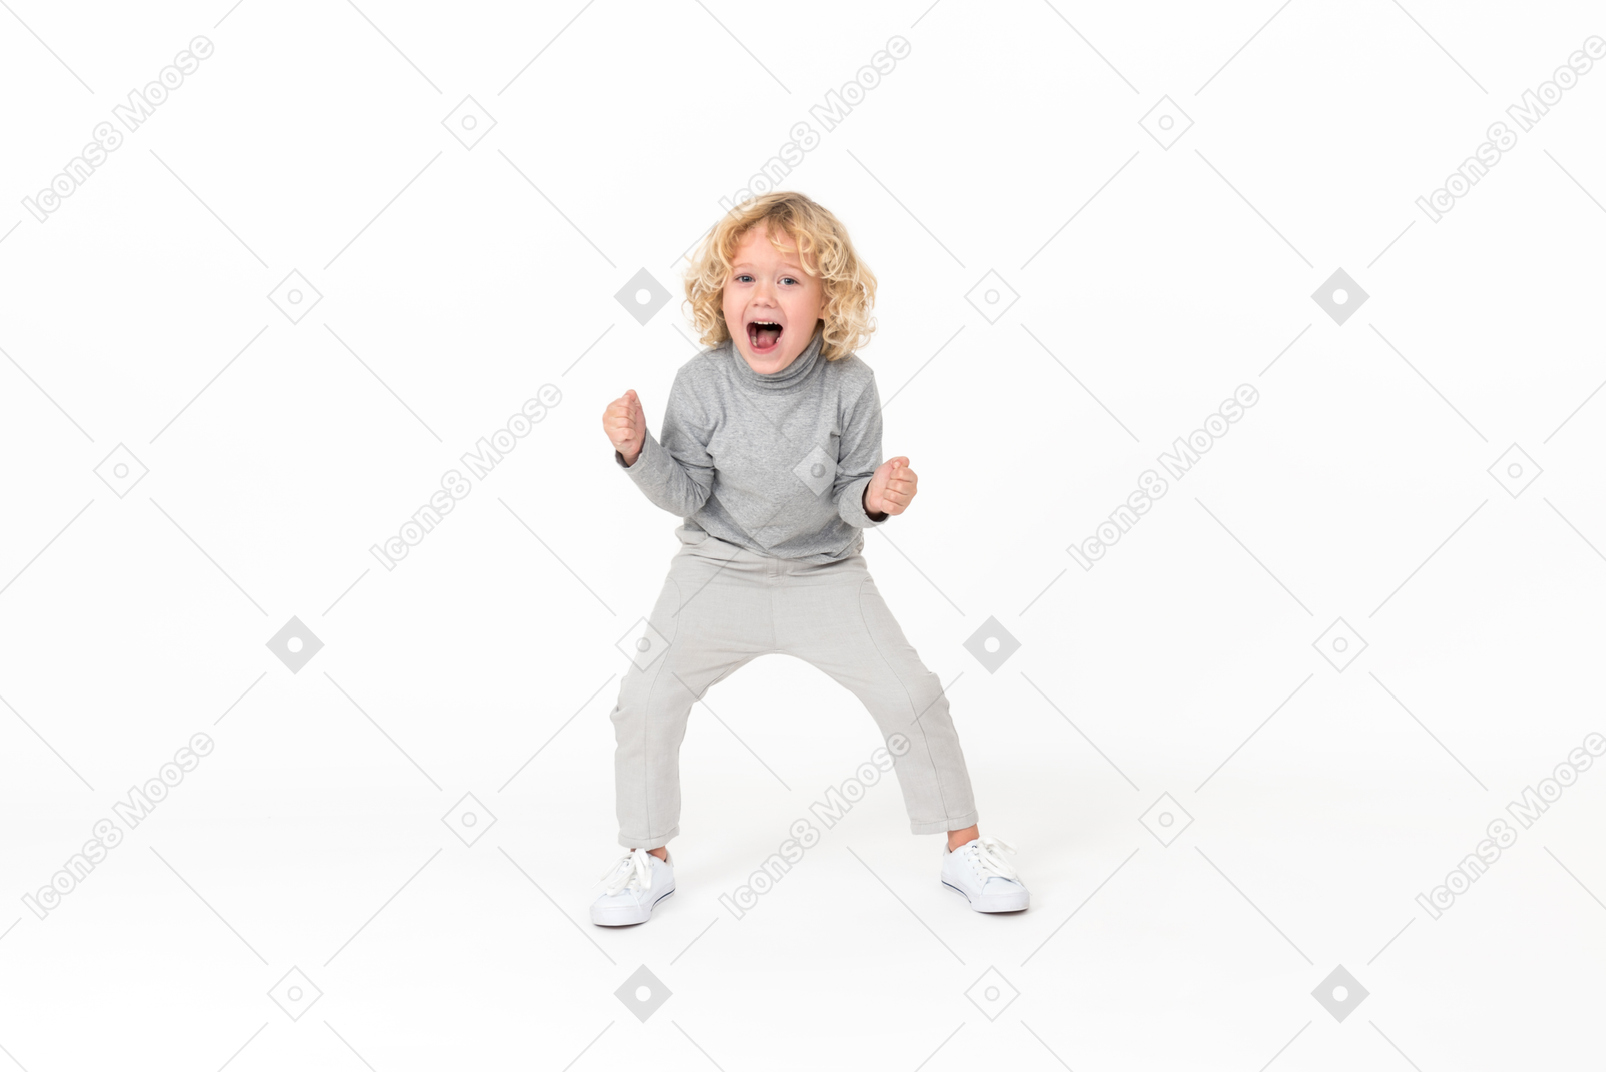 Super excited kid boy standing with fists clenched